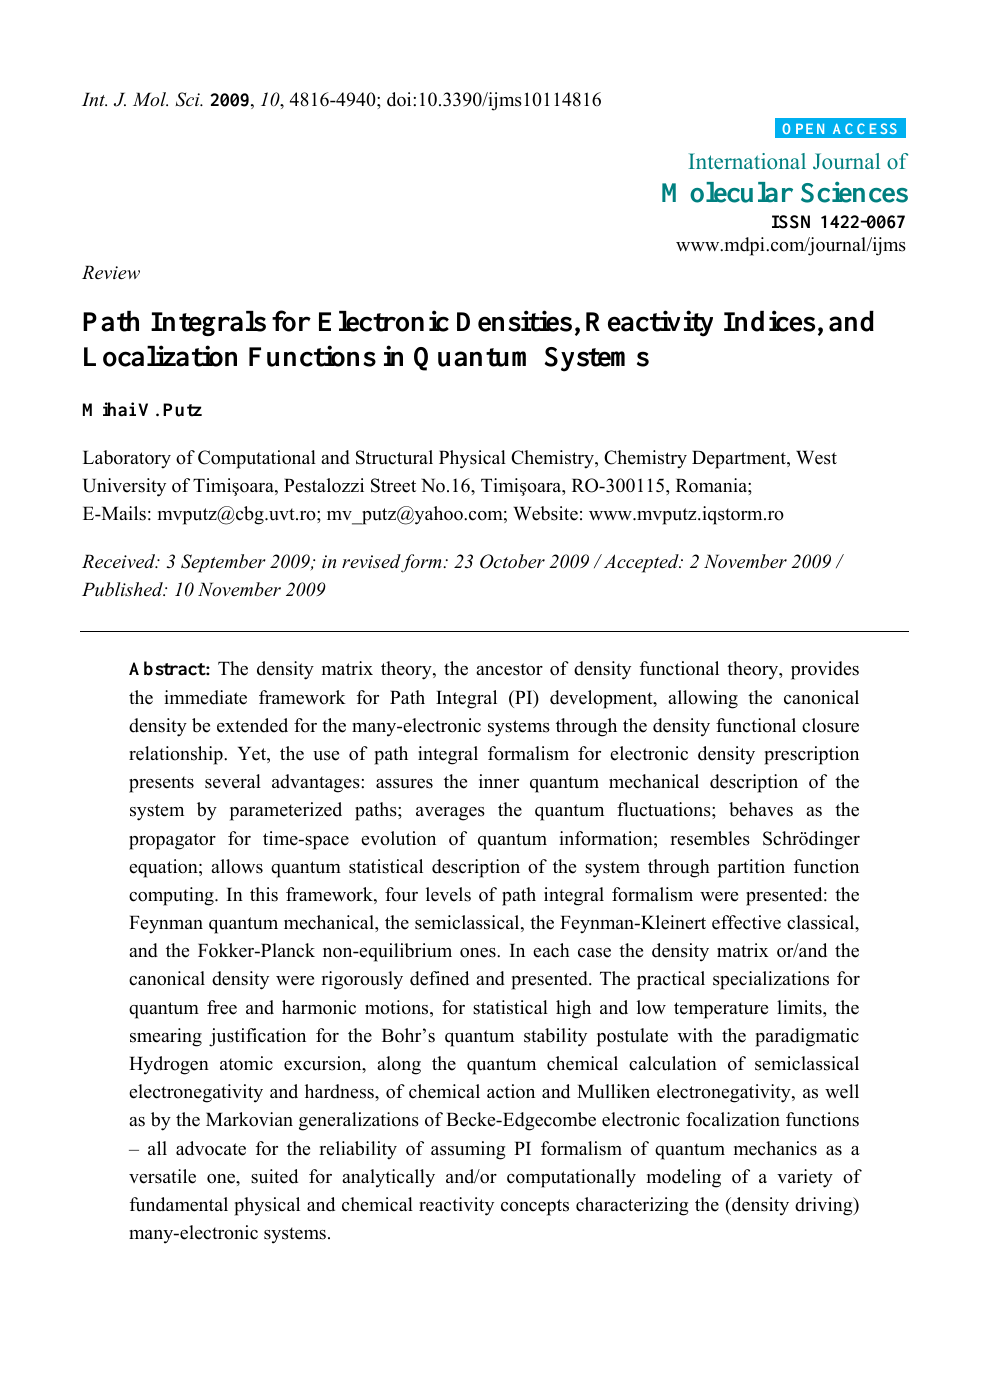 Path Integrals For Electronic Densities Reactivity Indices And Localization Functions In Quantum Systems Topic Of Research Paper In Physical Sciences Download Scholarly Article Pdf And Read For Free On Cyberleninka Open